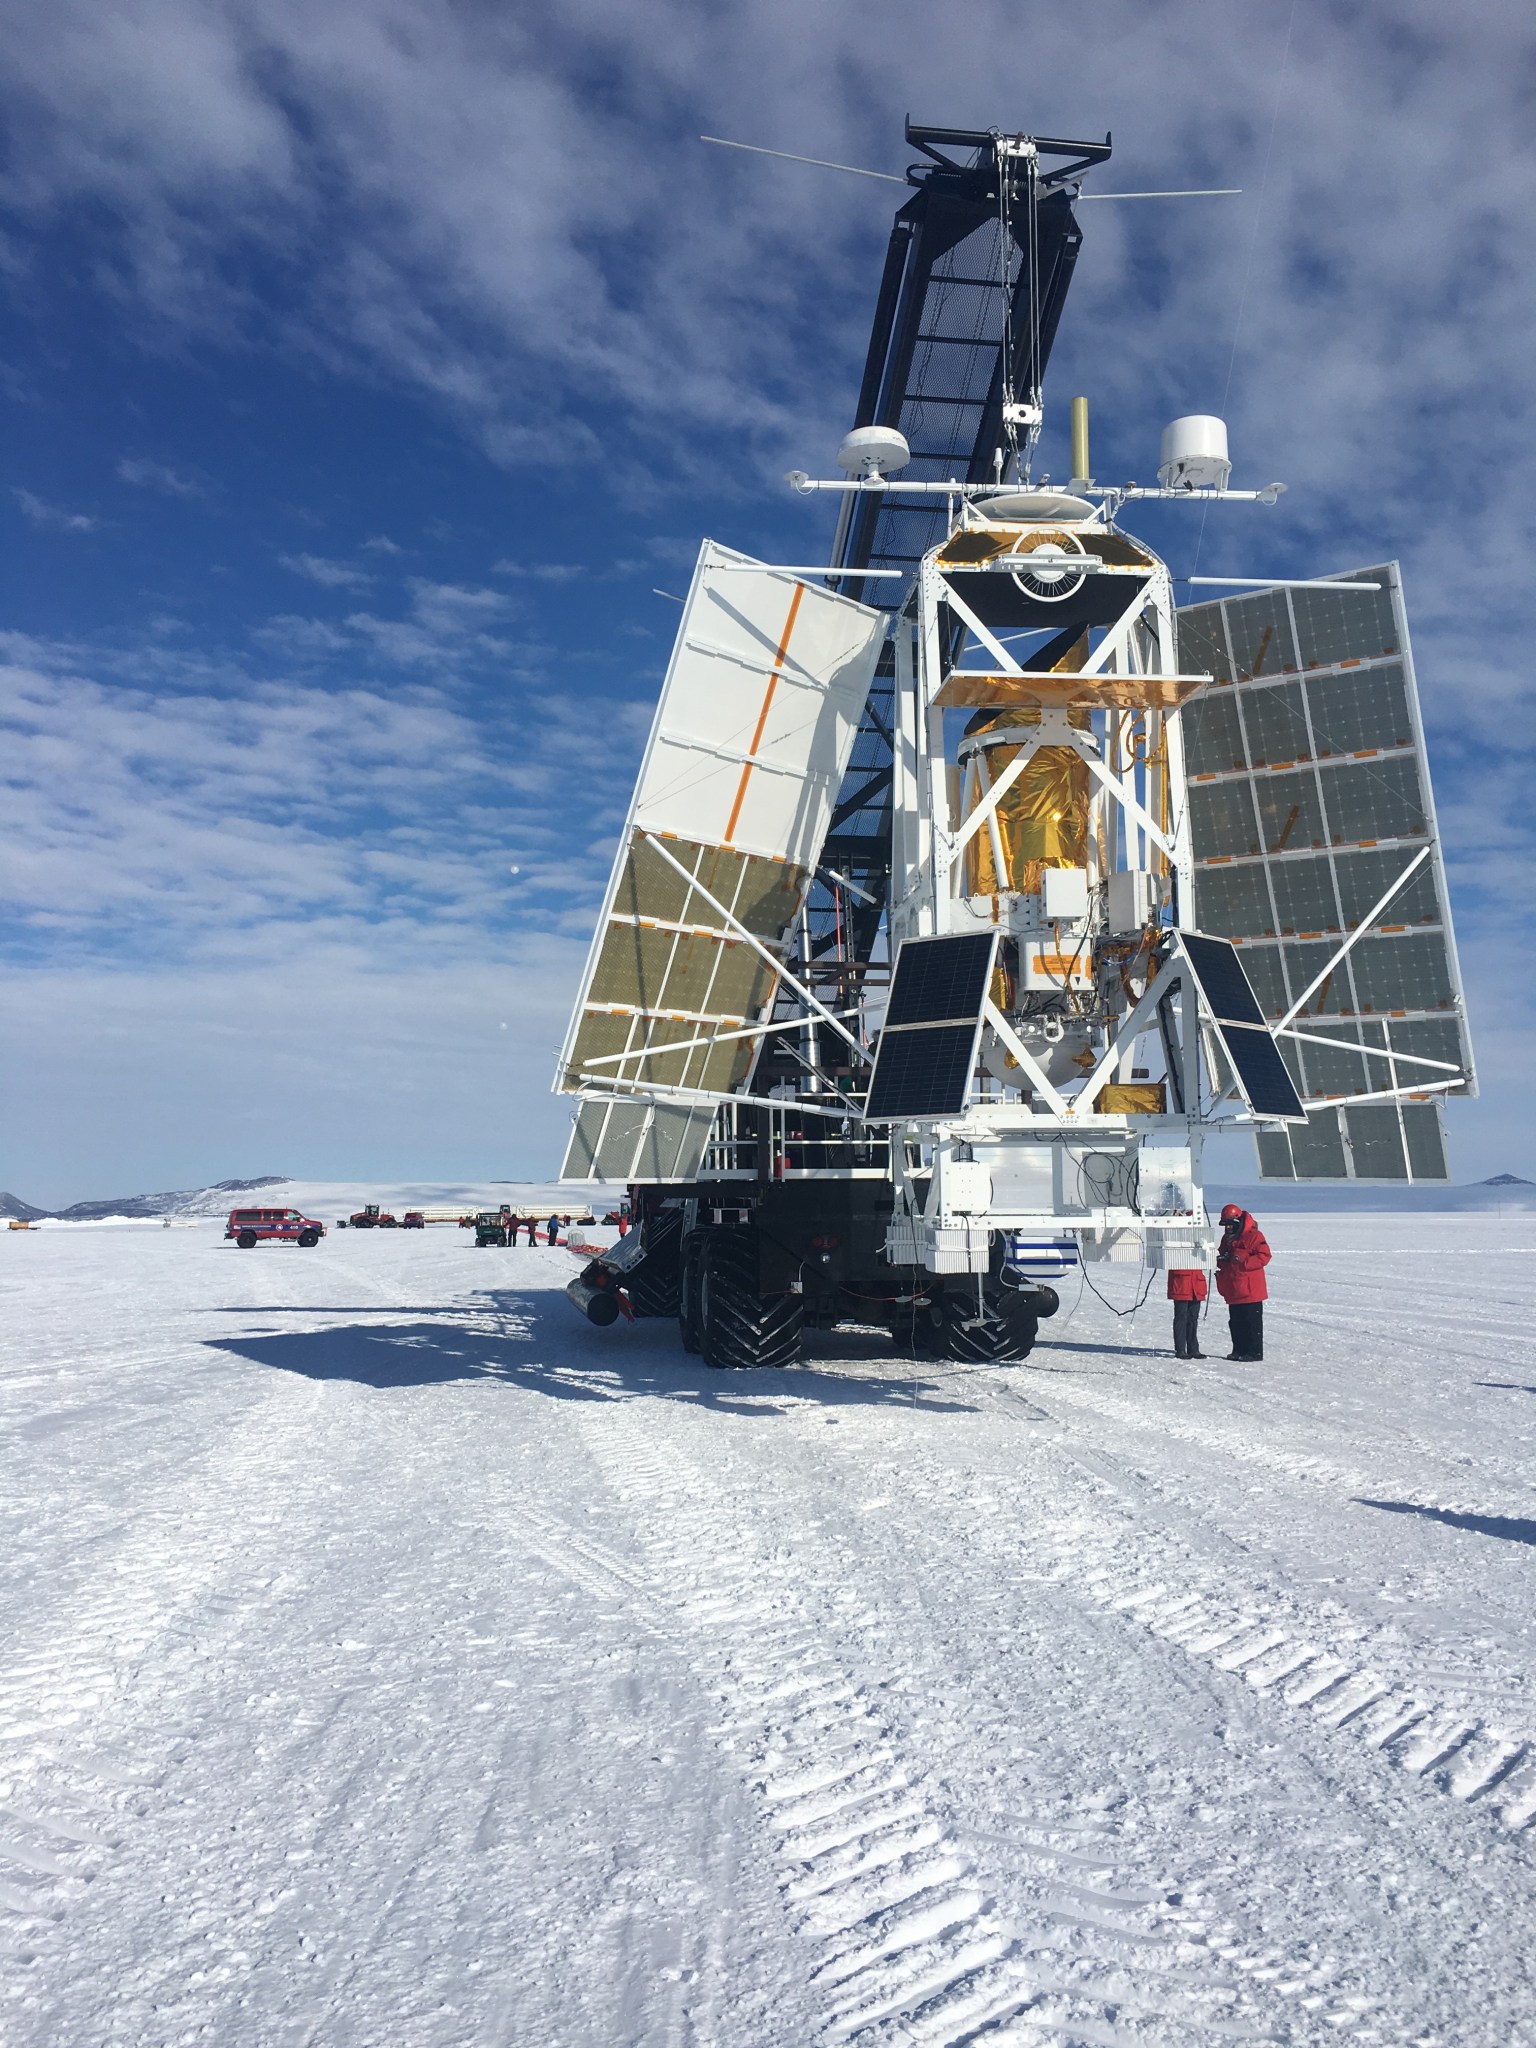 A large metal frame with various panels and instrumentation on a large trailer on the snow in Antarctica.